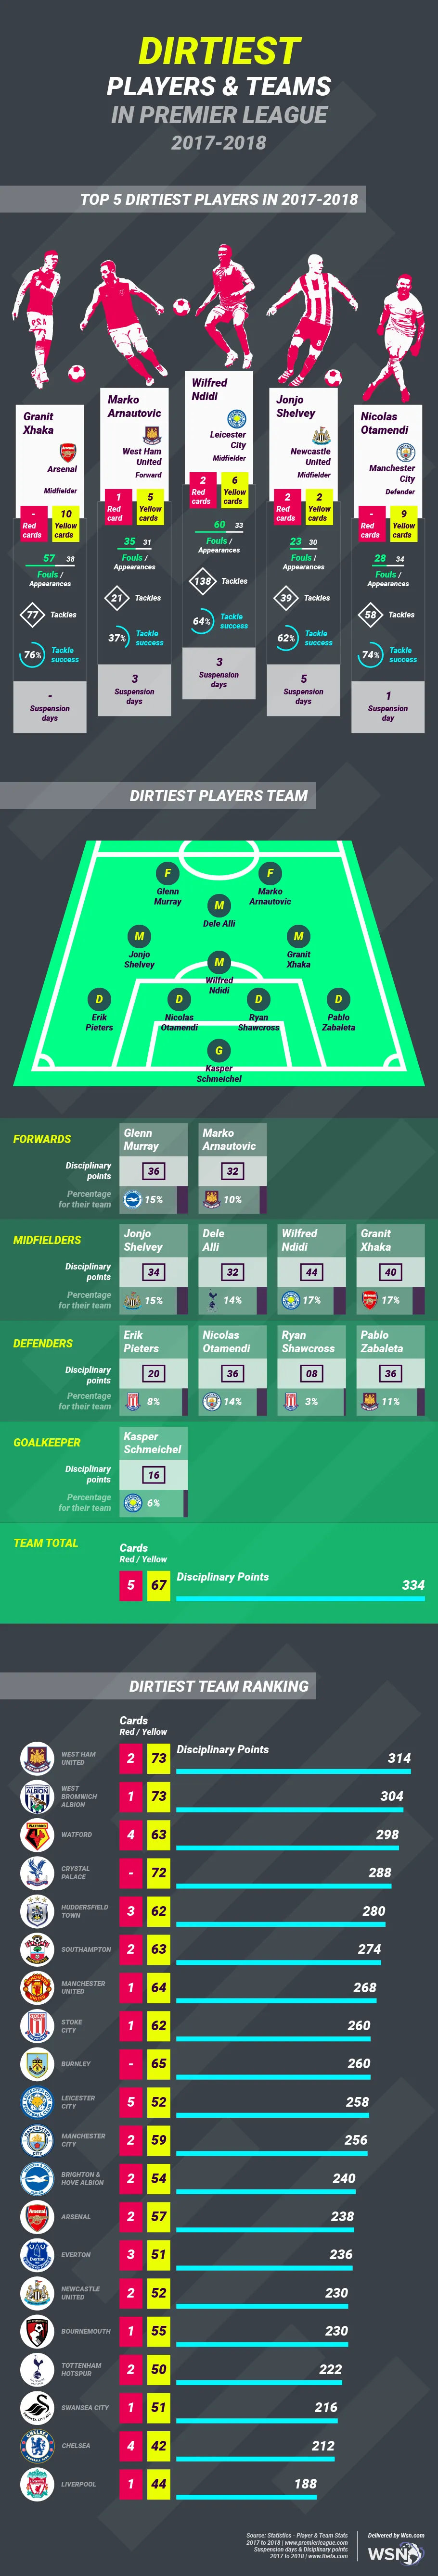 Dirtiest teams and players in the Premier League 2017-2018 Infographic